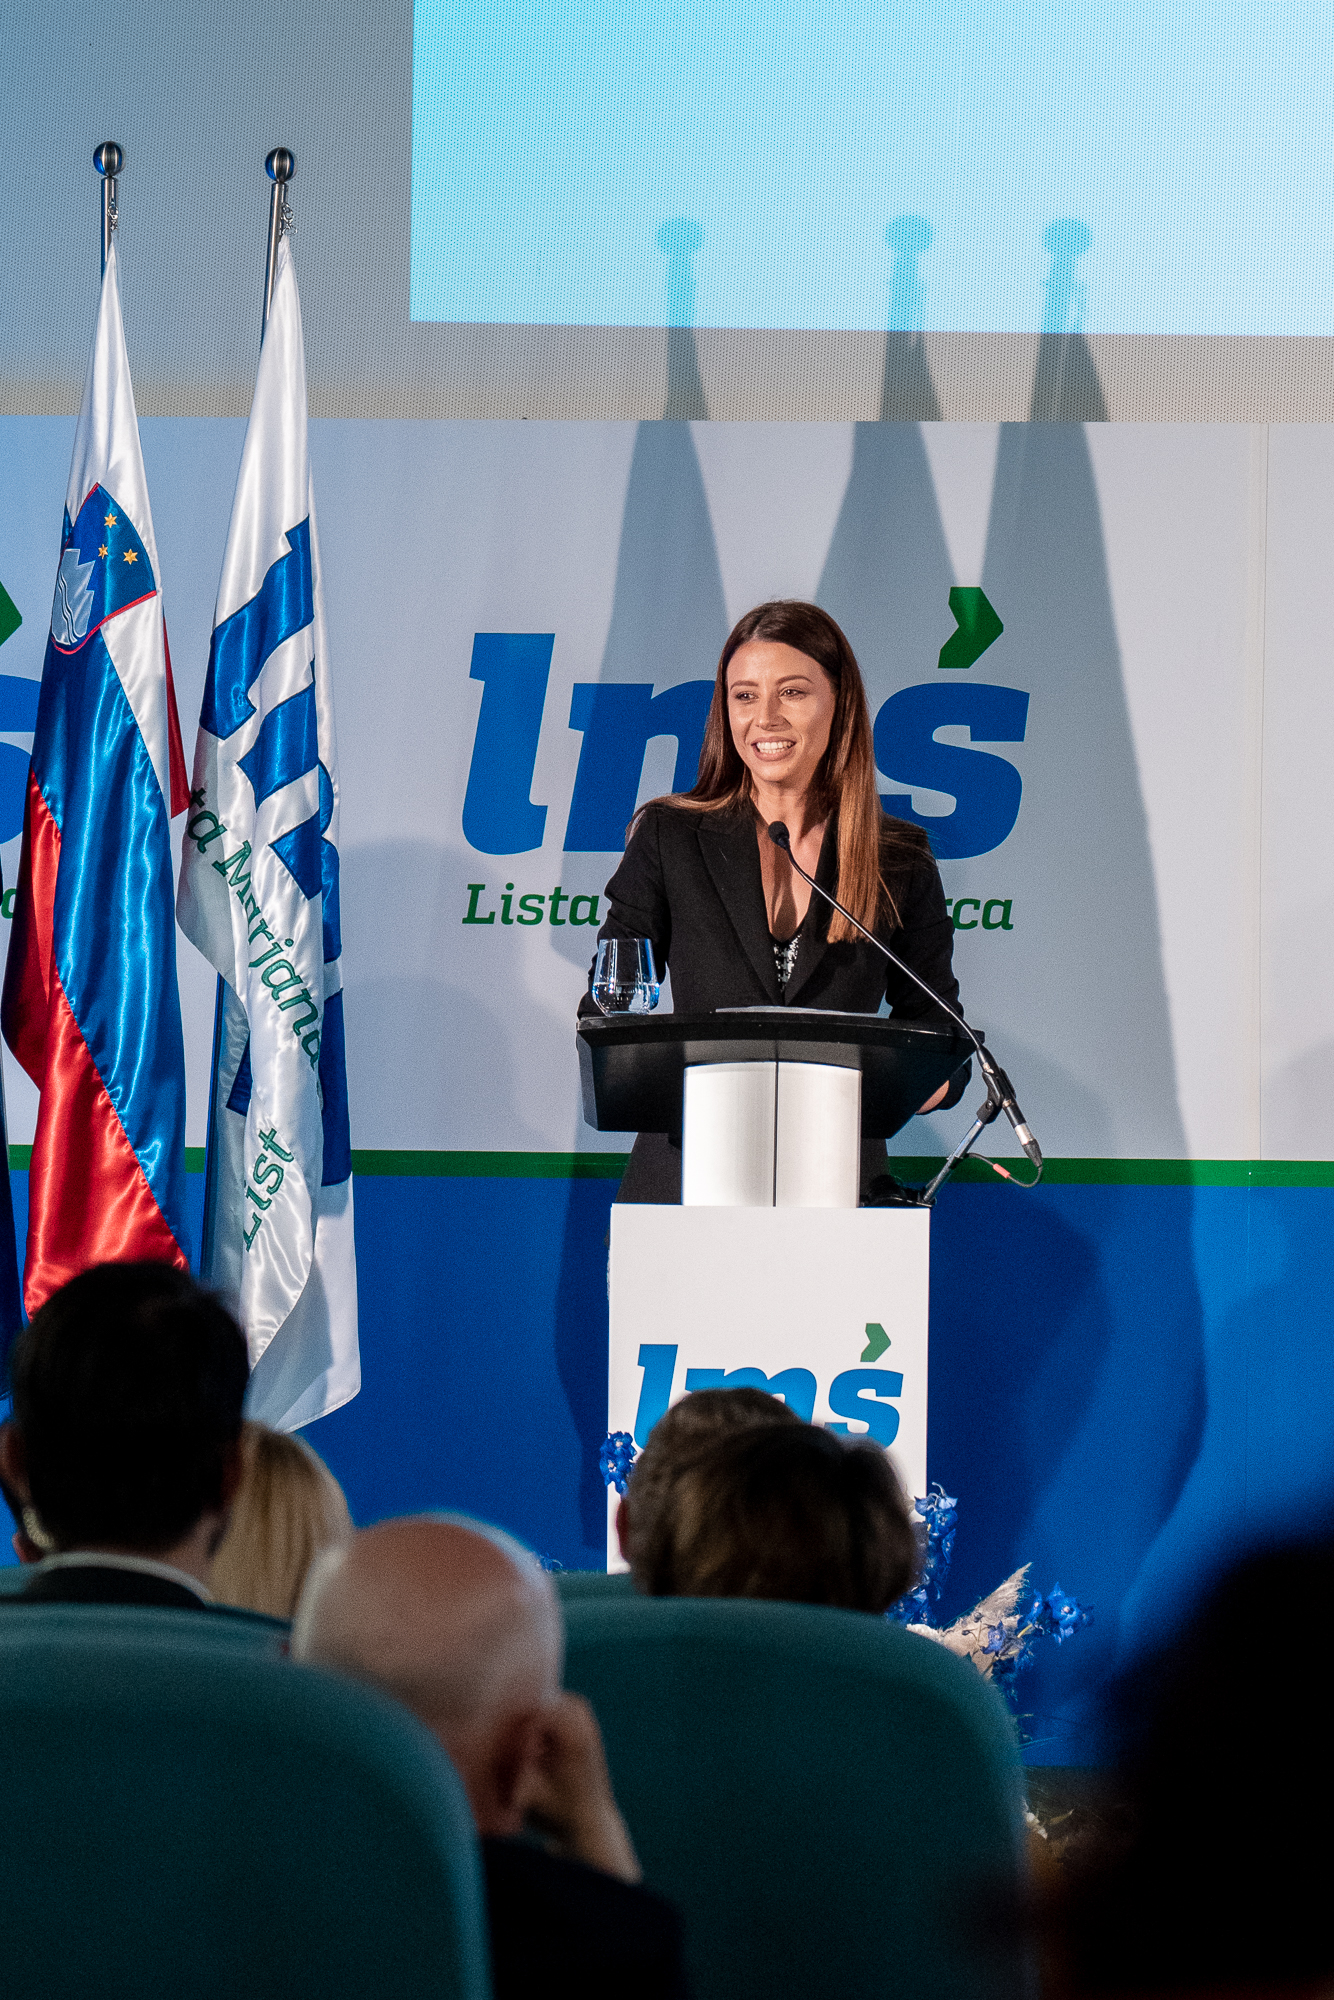 Irena Joveva, candidate of the Marjan Šarec List (LMŠ) in the EU election, on the stage on the Fifth Congress of Lista Marjana Šarca in Trbovlje